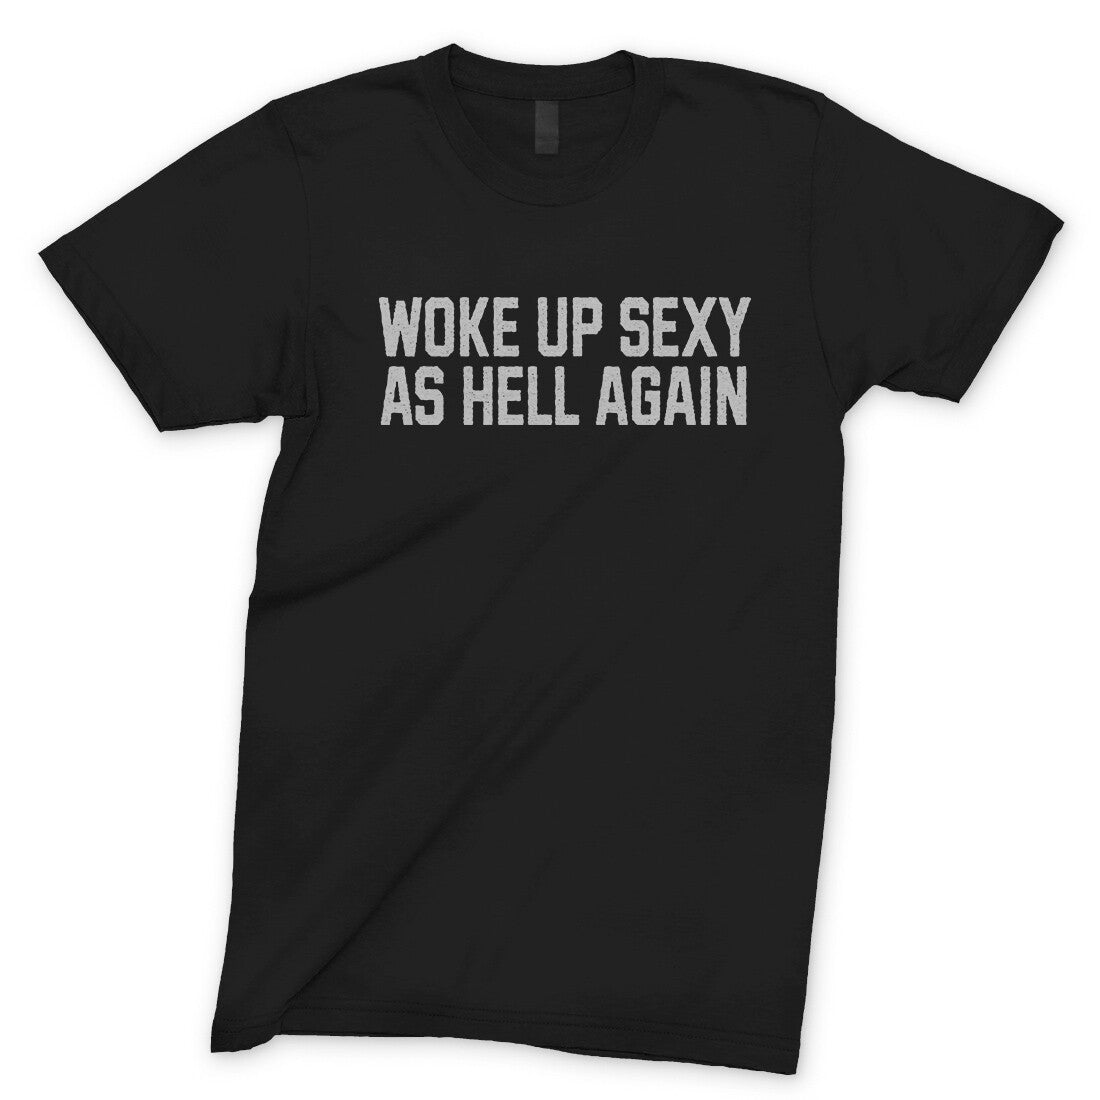 Woke Up Sexy as Hell in Black Color